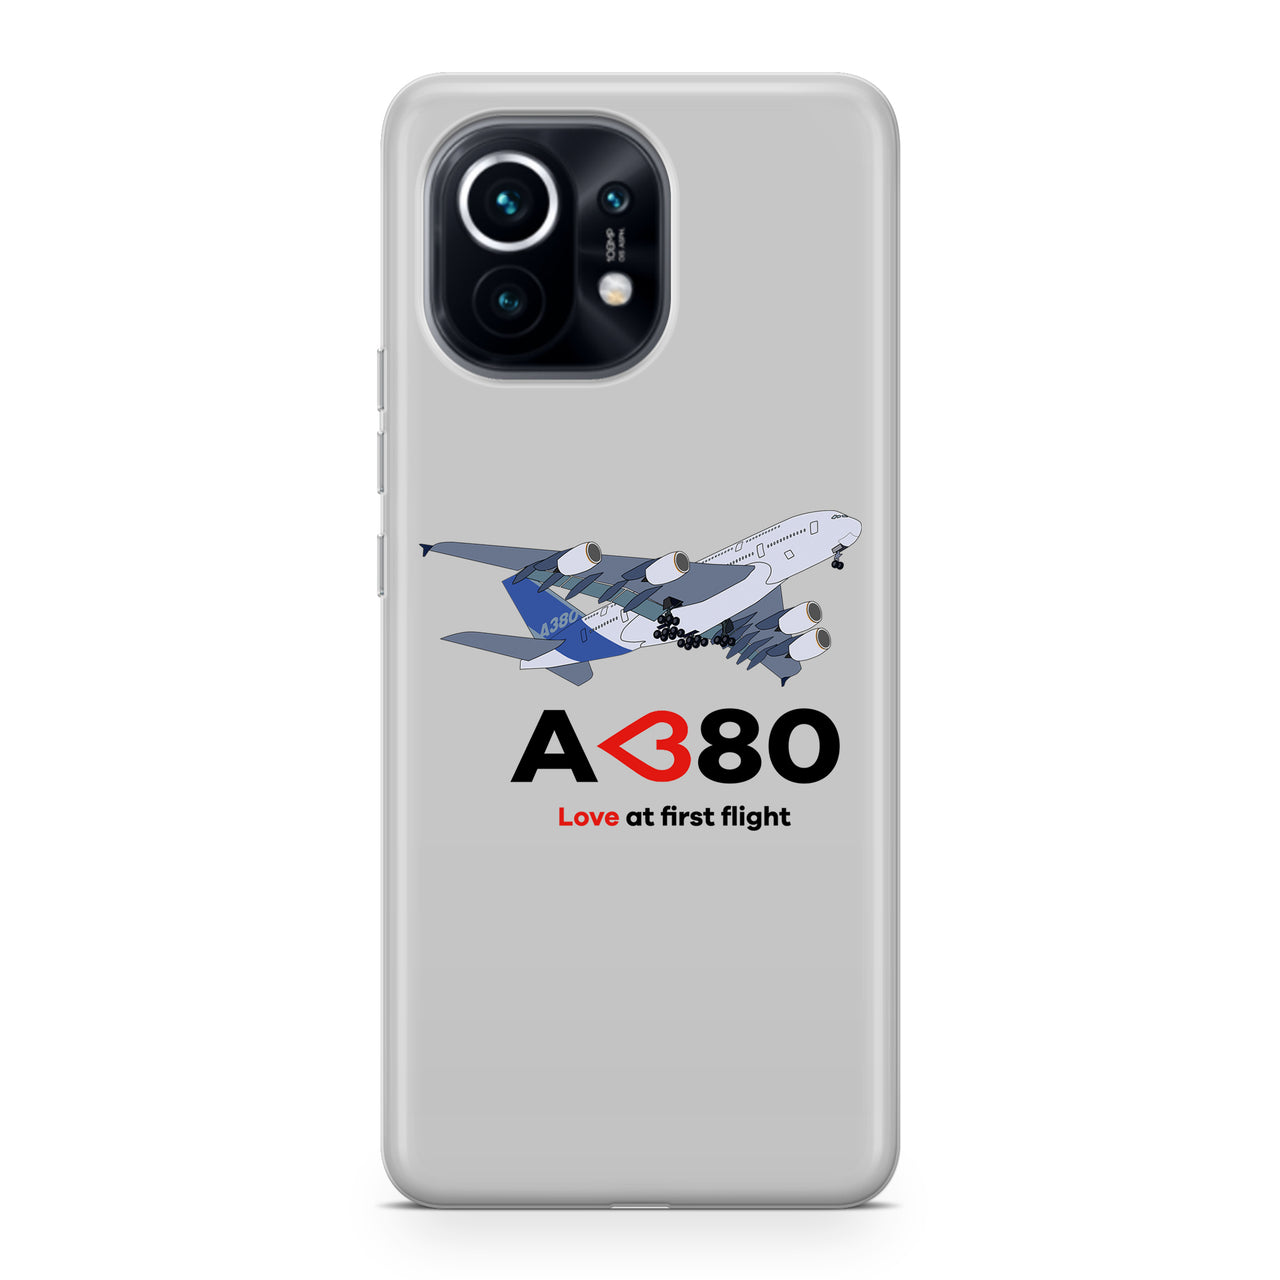 Airbus A380 Love at first flight Designed Xiaomi Cases